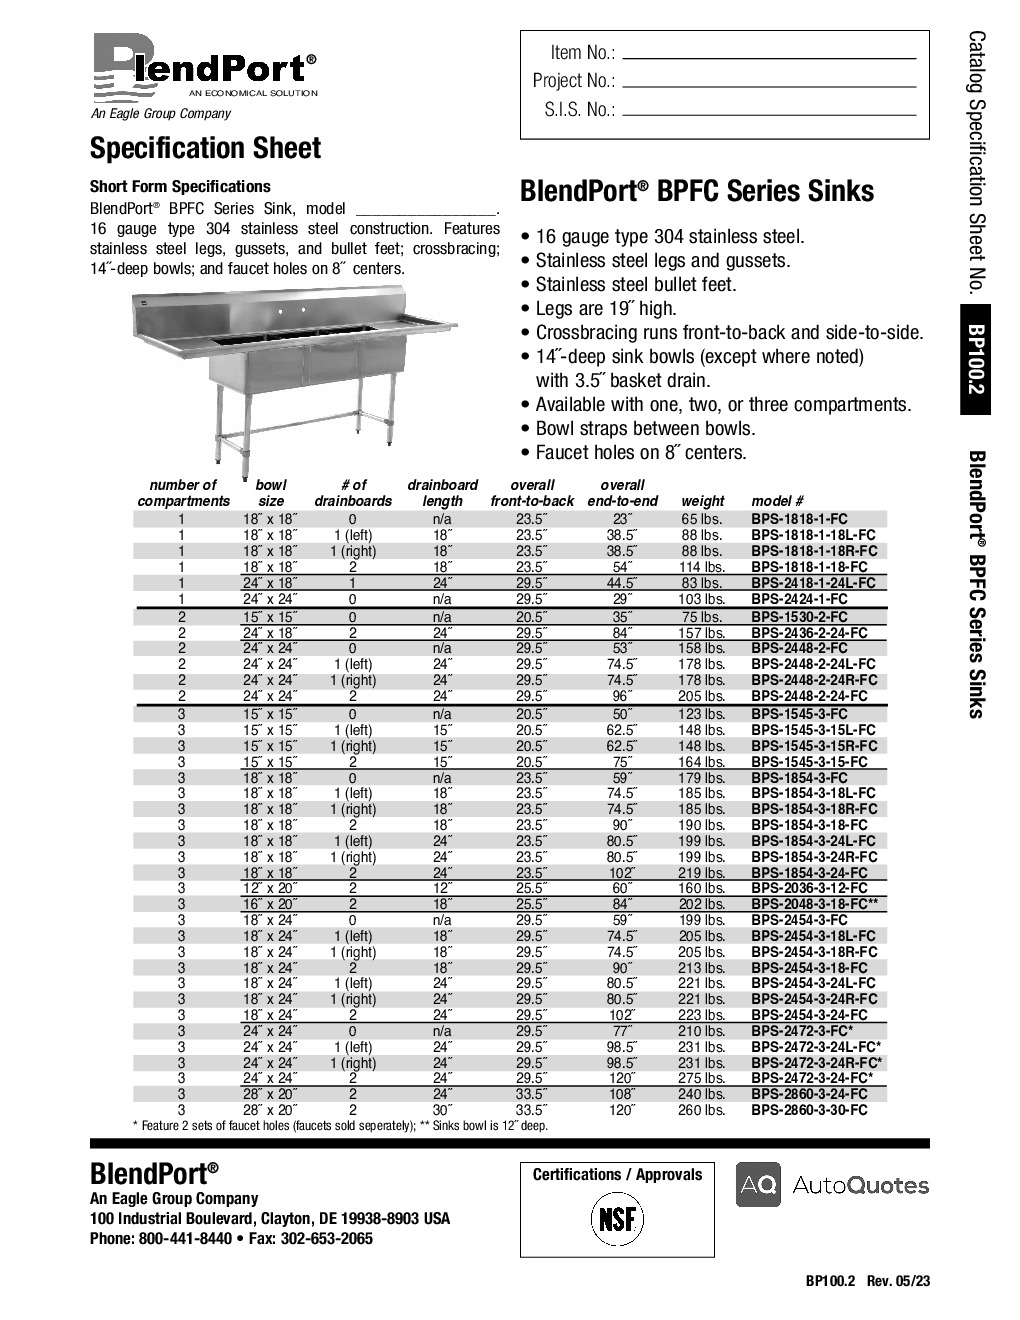 Eagle Group BPS-2860-3-24-FC (3) Three Compartment Sink